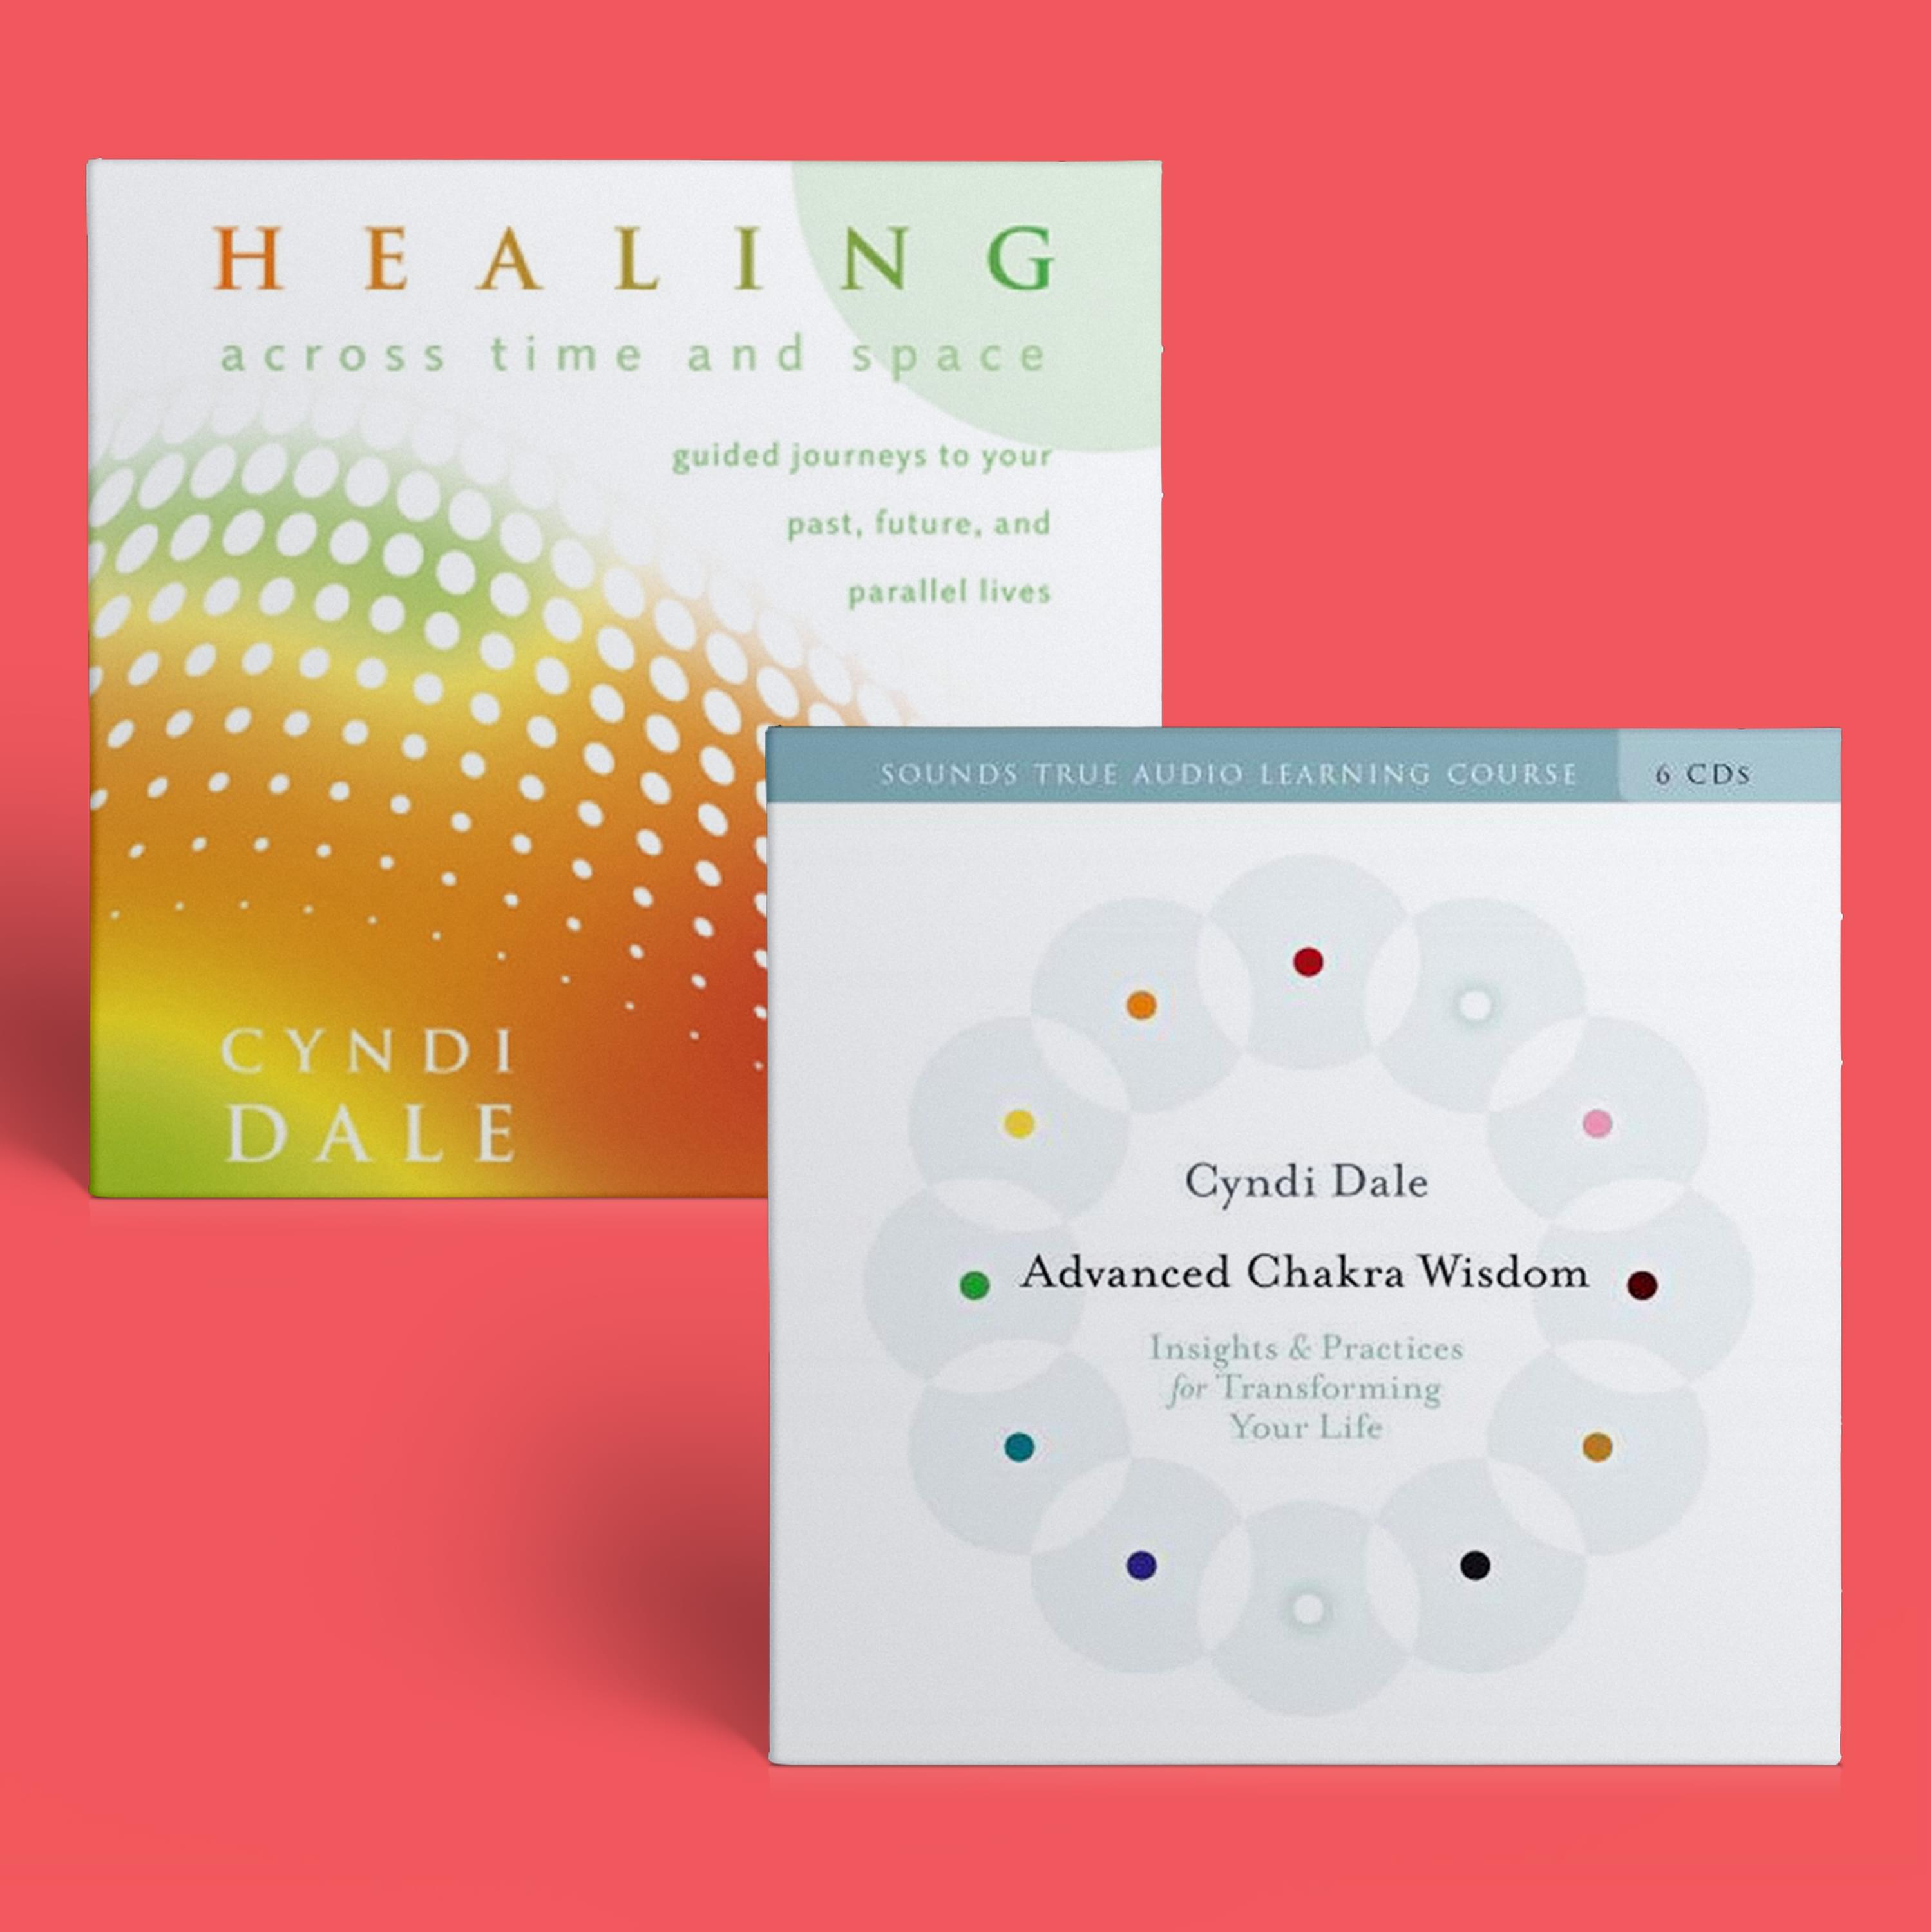 Advanced Chakra Wisdom Cover And Healing Across Time and Space Cover